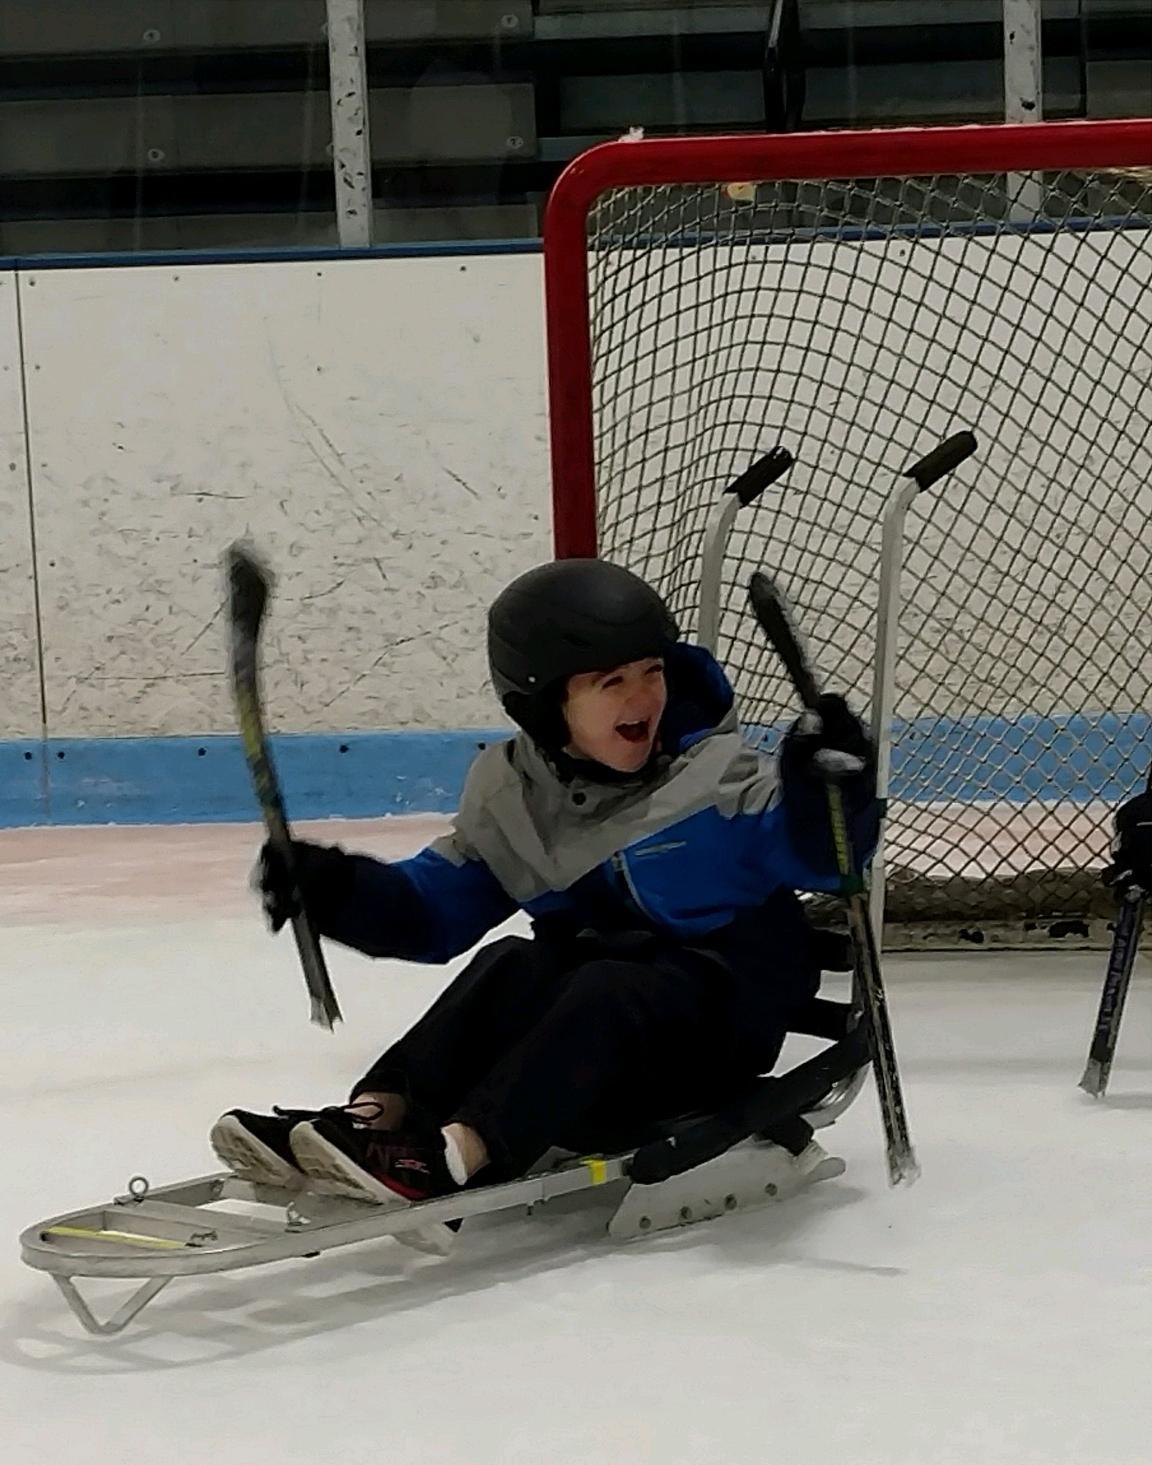 A laughing child in an ice sled in front of a hockey net.